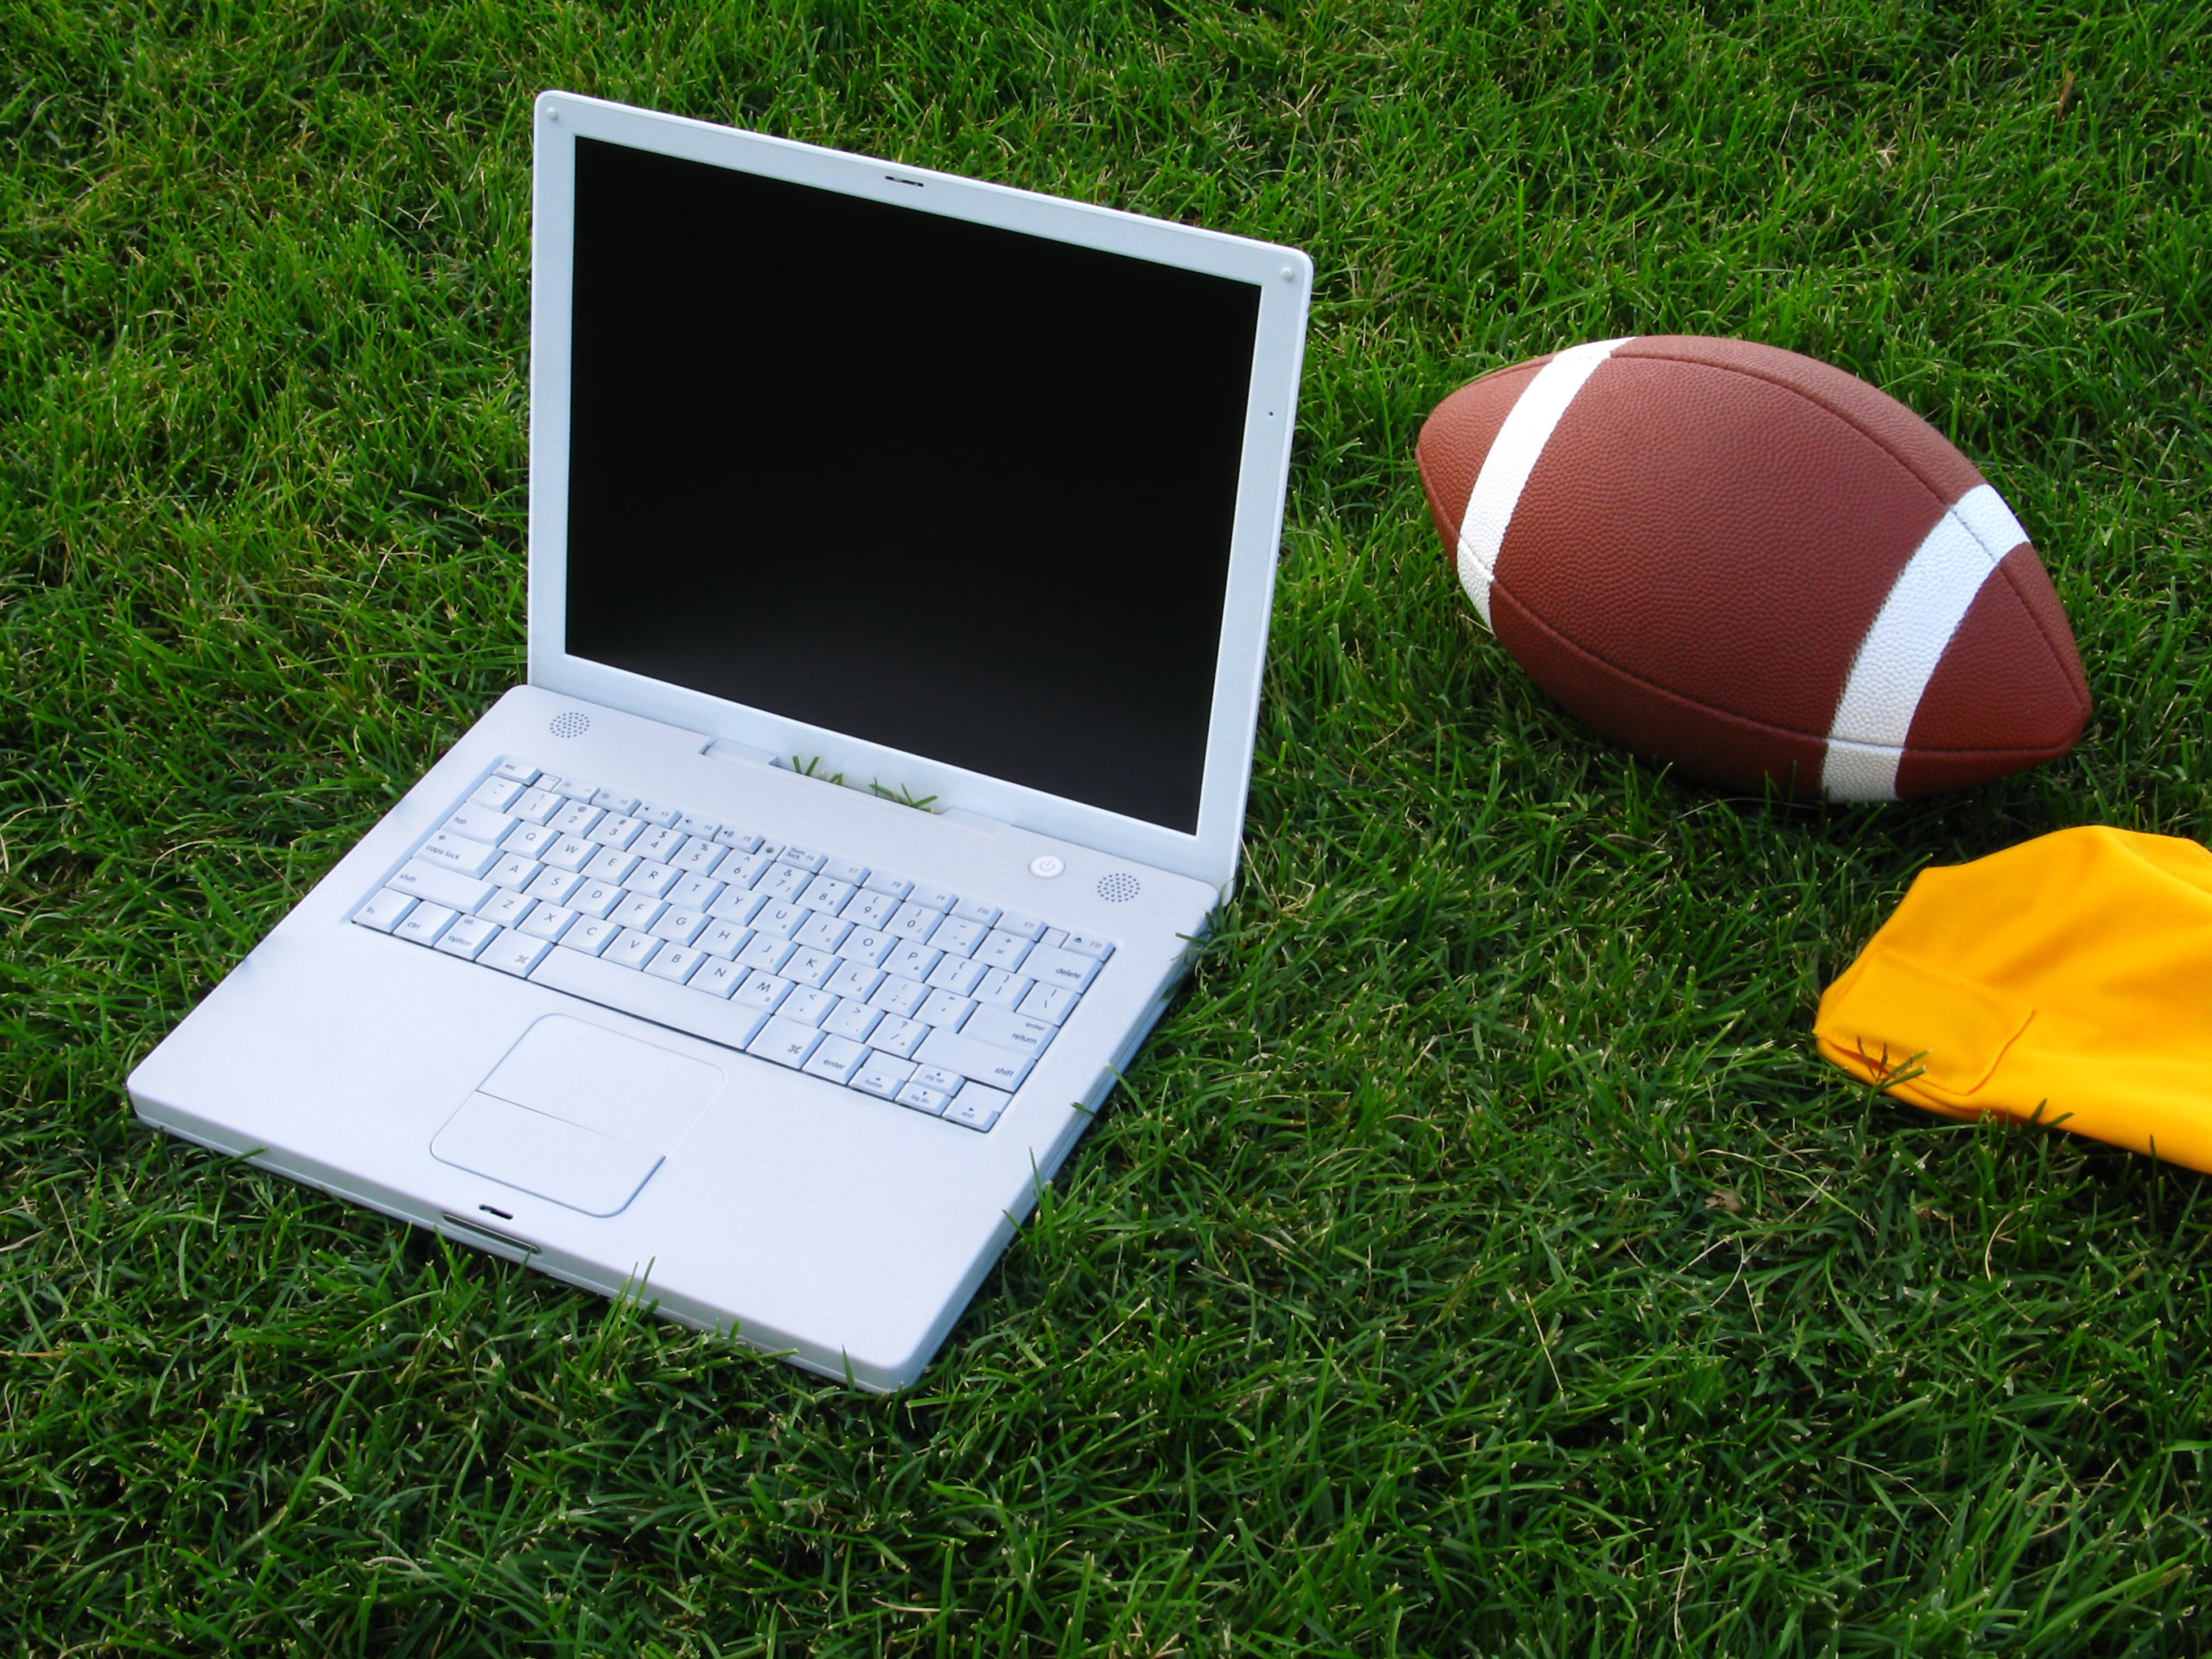 Fantasy Football Concept: Laptop Computer and Football on Grass Field